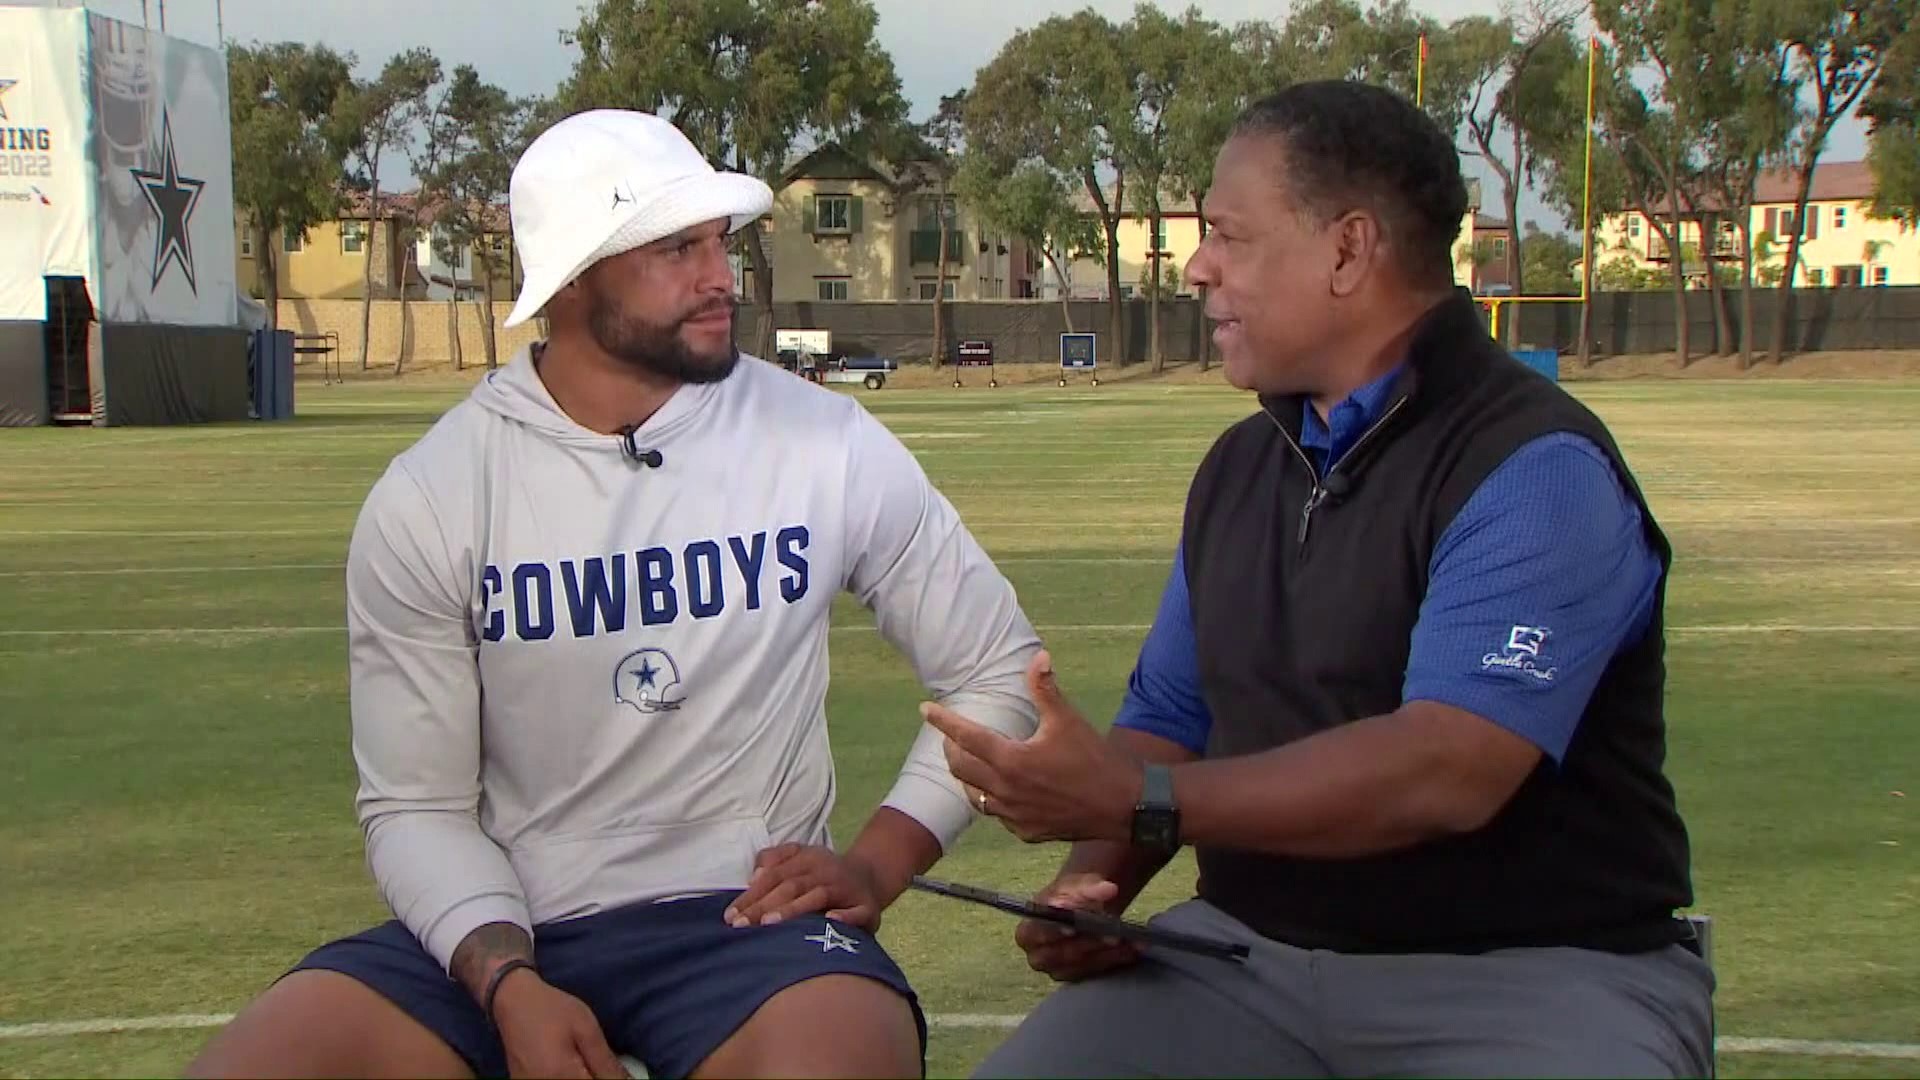 In a sitdown with WFAA's Joe Trahan, Dallas Cowboys QB Dak Prescott also spoke about self-care and his advice to youth.